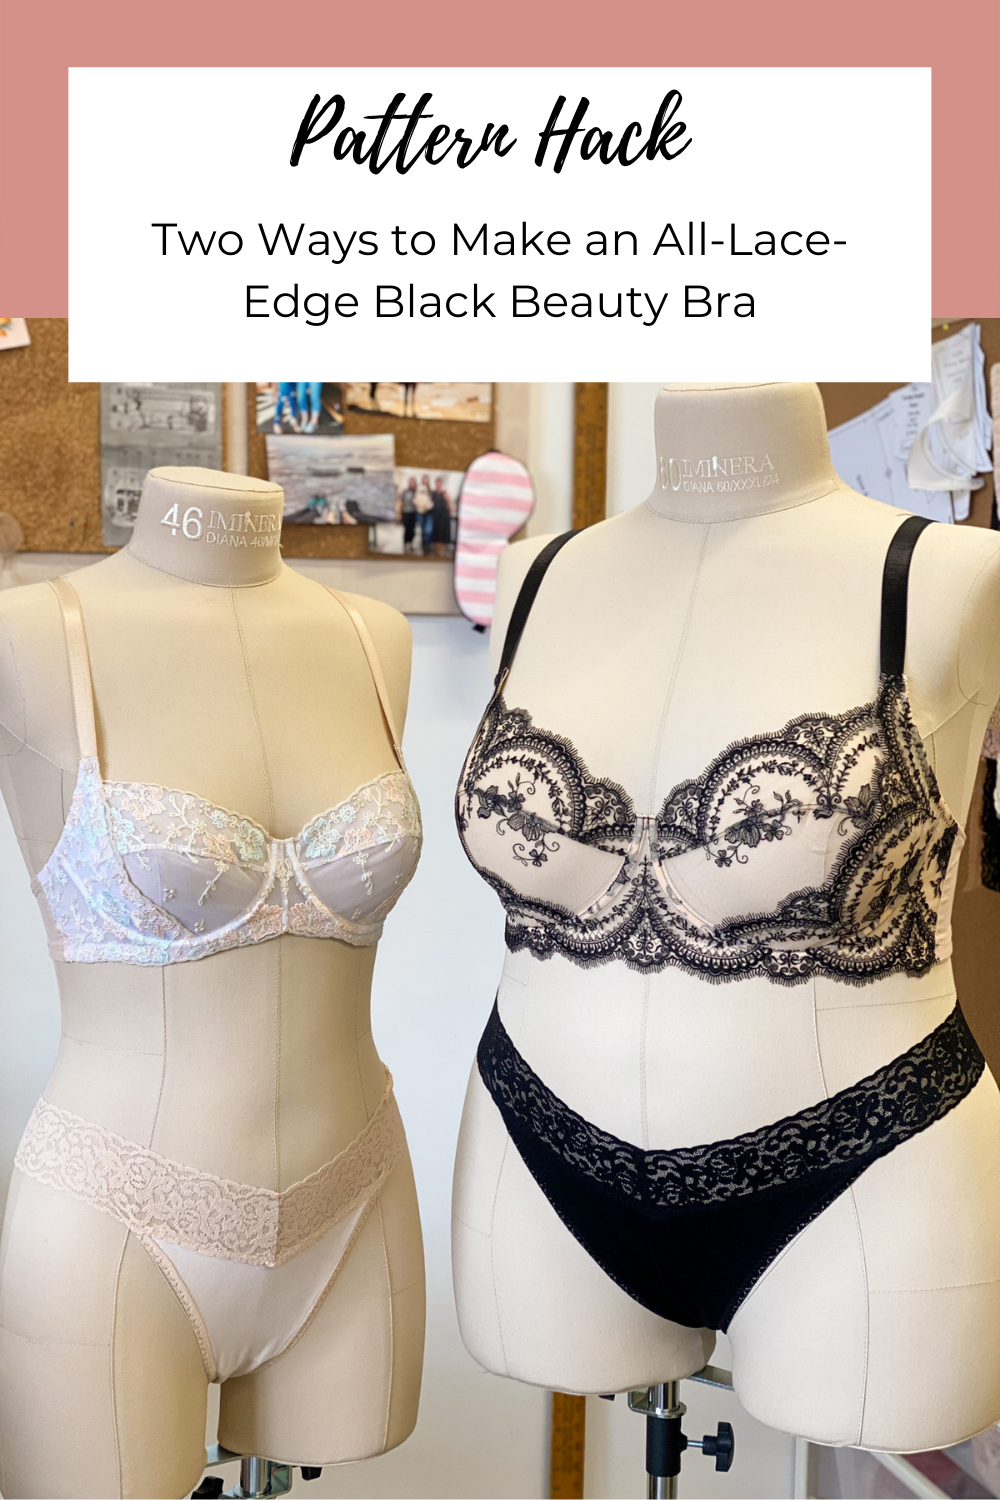 Two Ways to Make an All-Lace-Edge Black Beauty Bra | Pattern Hack